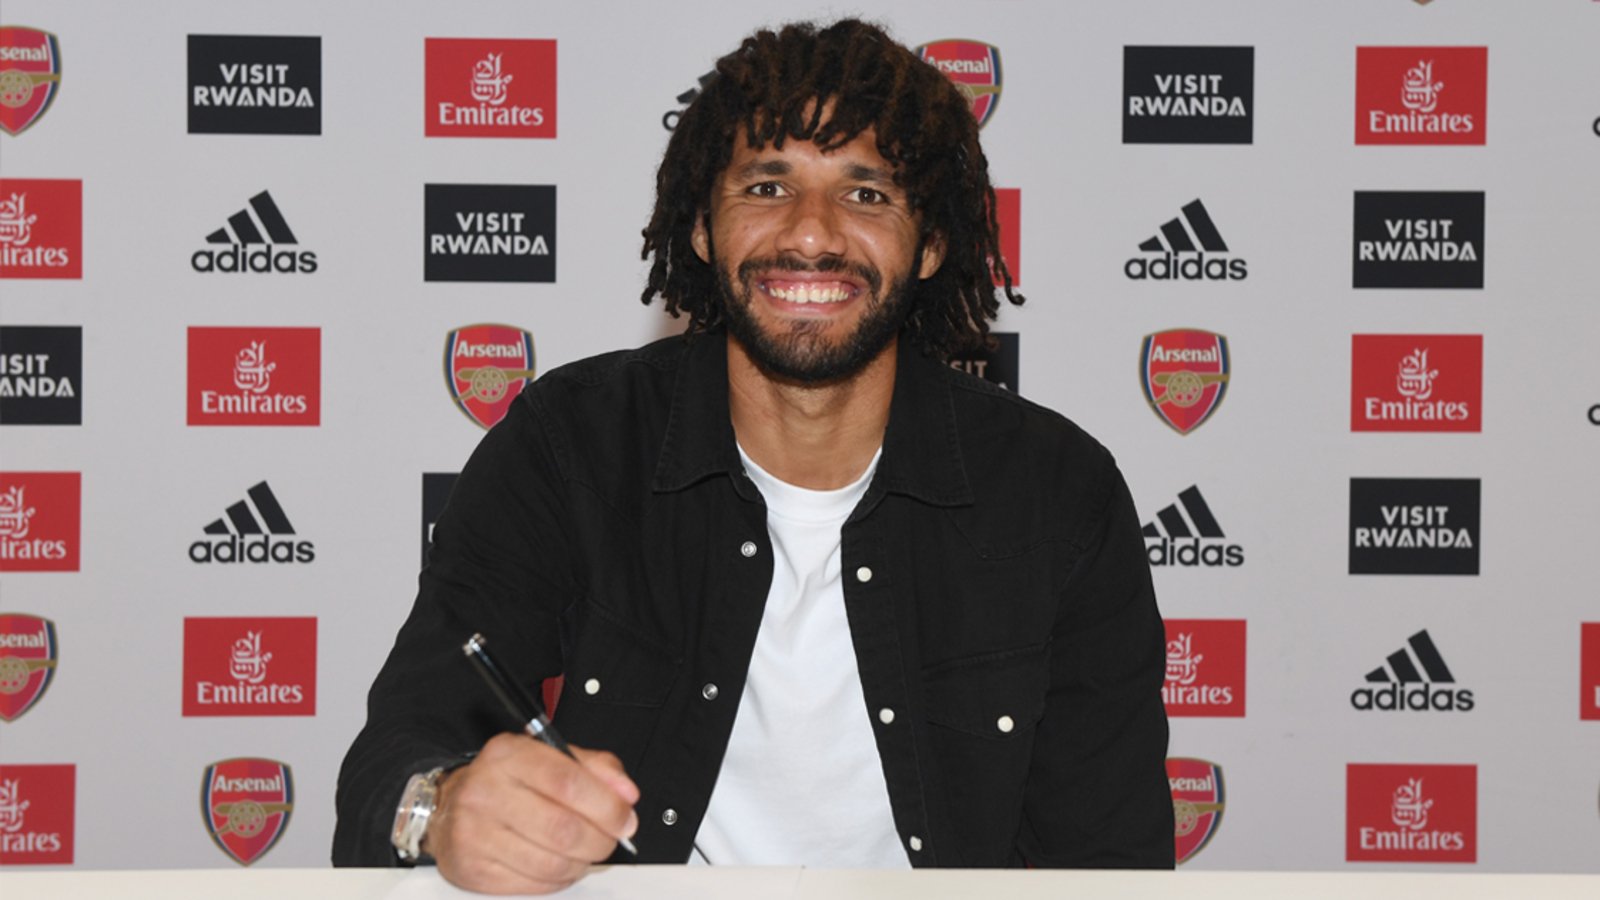 Mohamed Elneny signs new contract | News | Arsenal.com